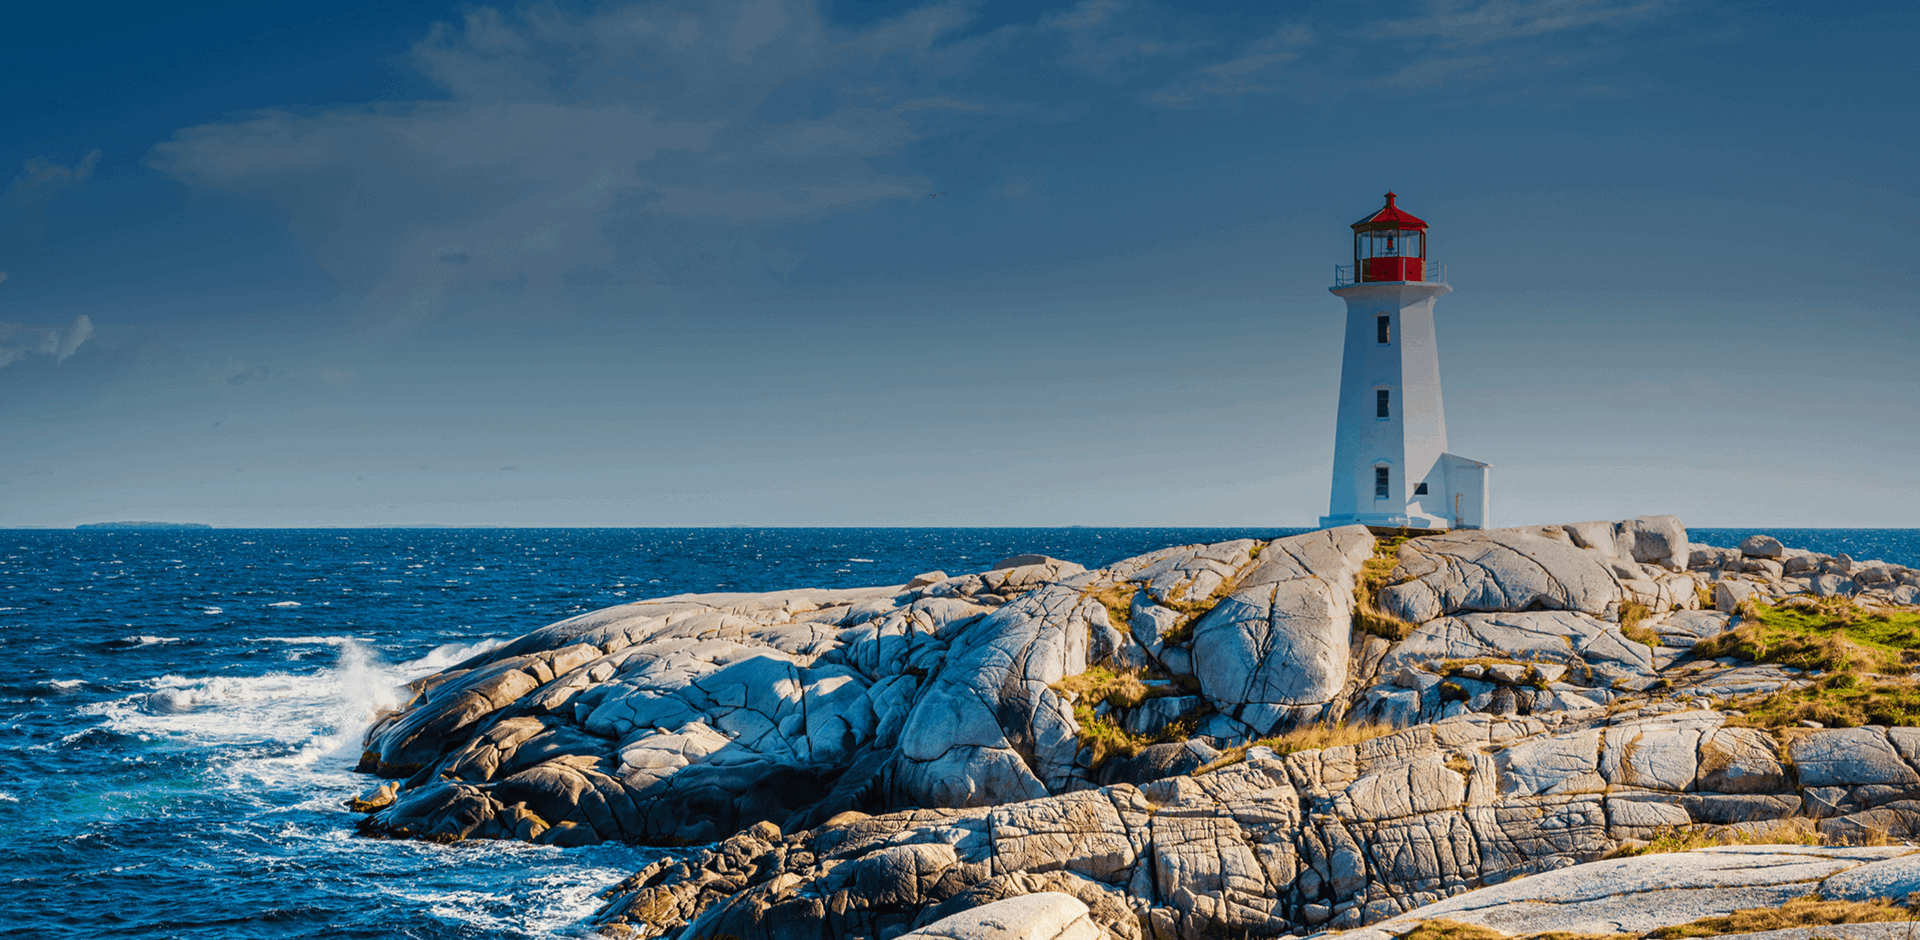 View of Peggy's Cove Lighthouse over rocky hill by the ocean under Summer Sky, Nova Scotia, Canada.